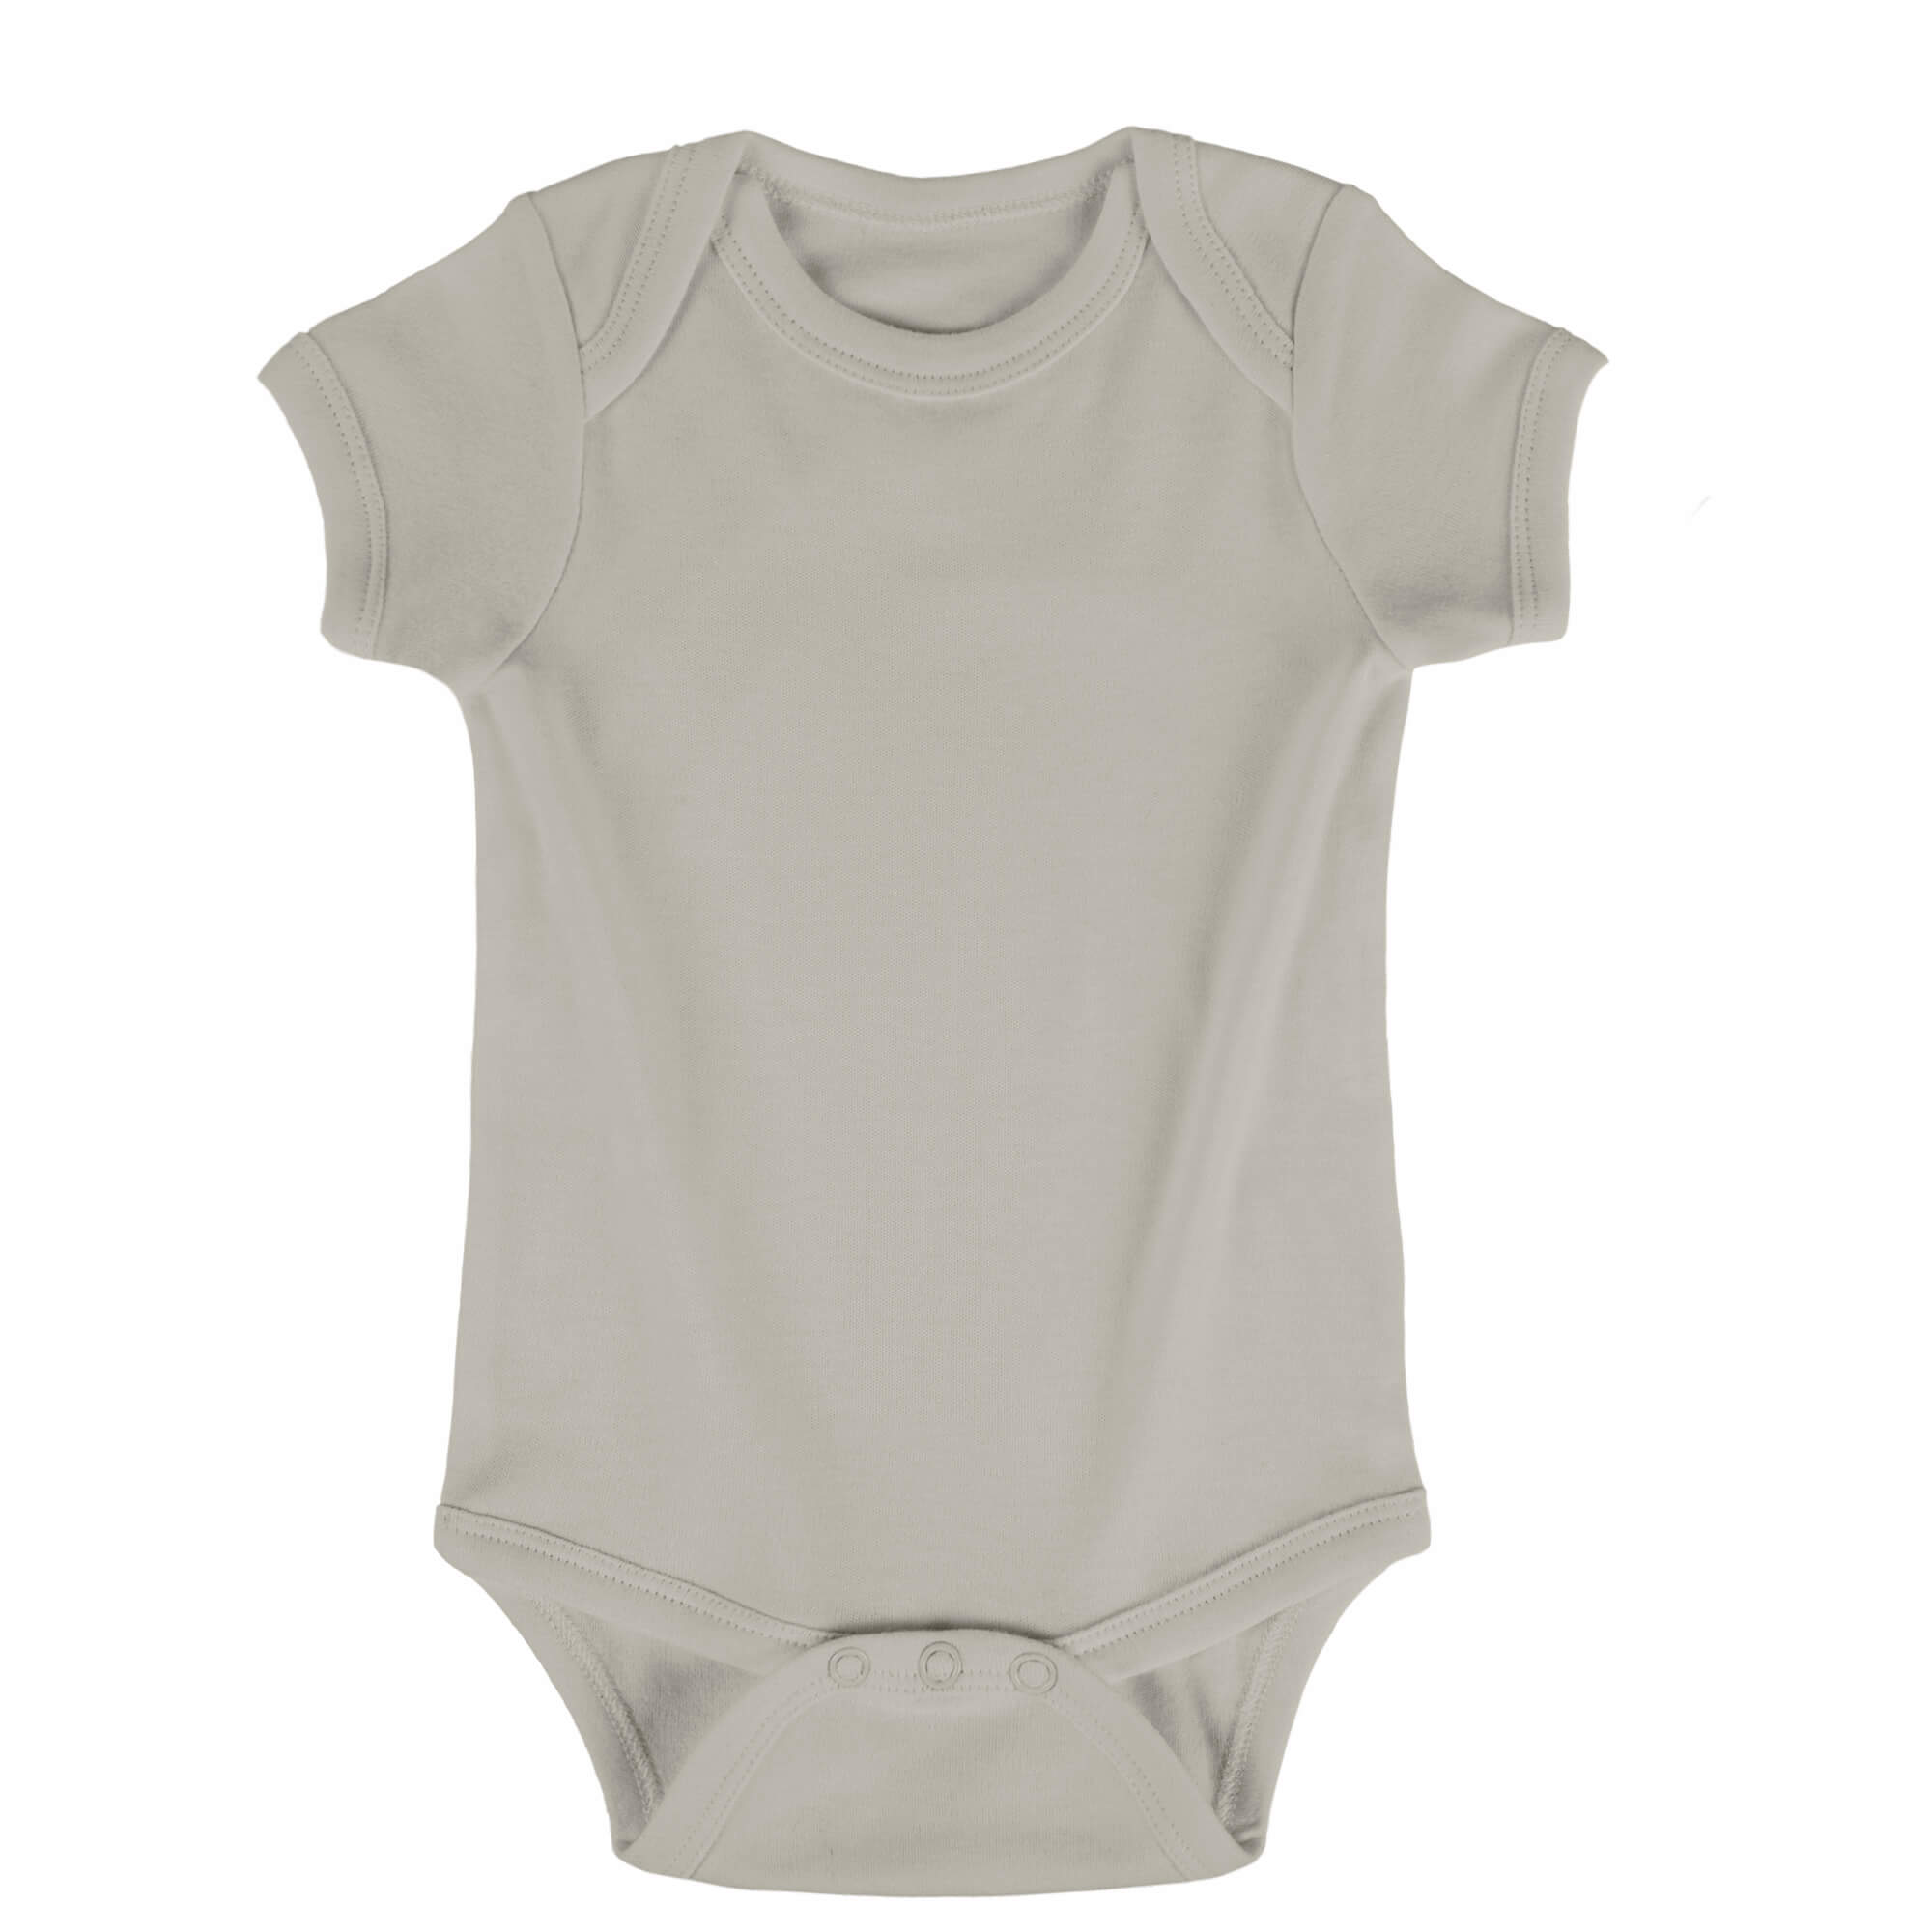 grey color number #67, onesie color selection, and color display.